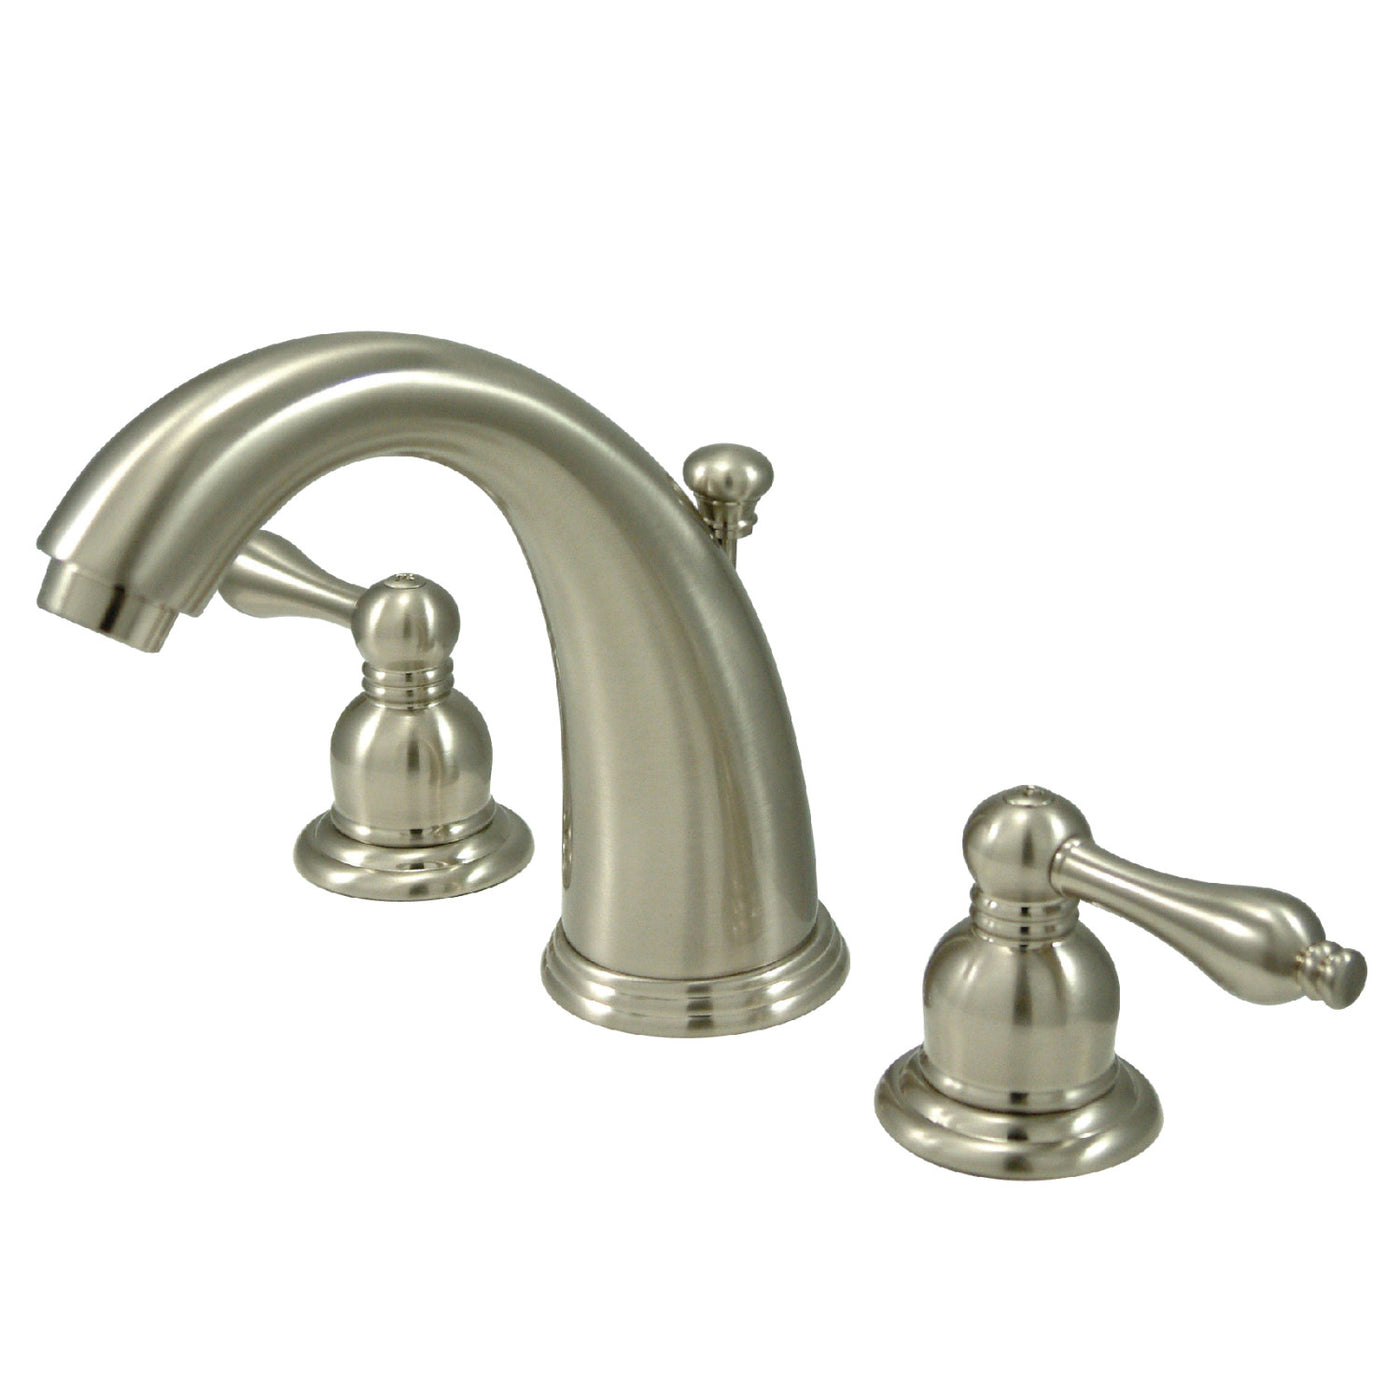 Elements of Design EB988AL Widespread Bathroom Faucet with Retail Pop-Up, Brushed Nickel